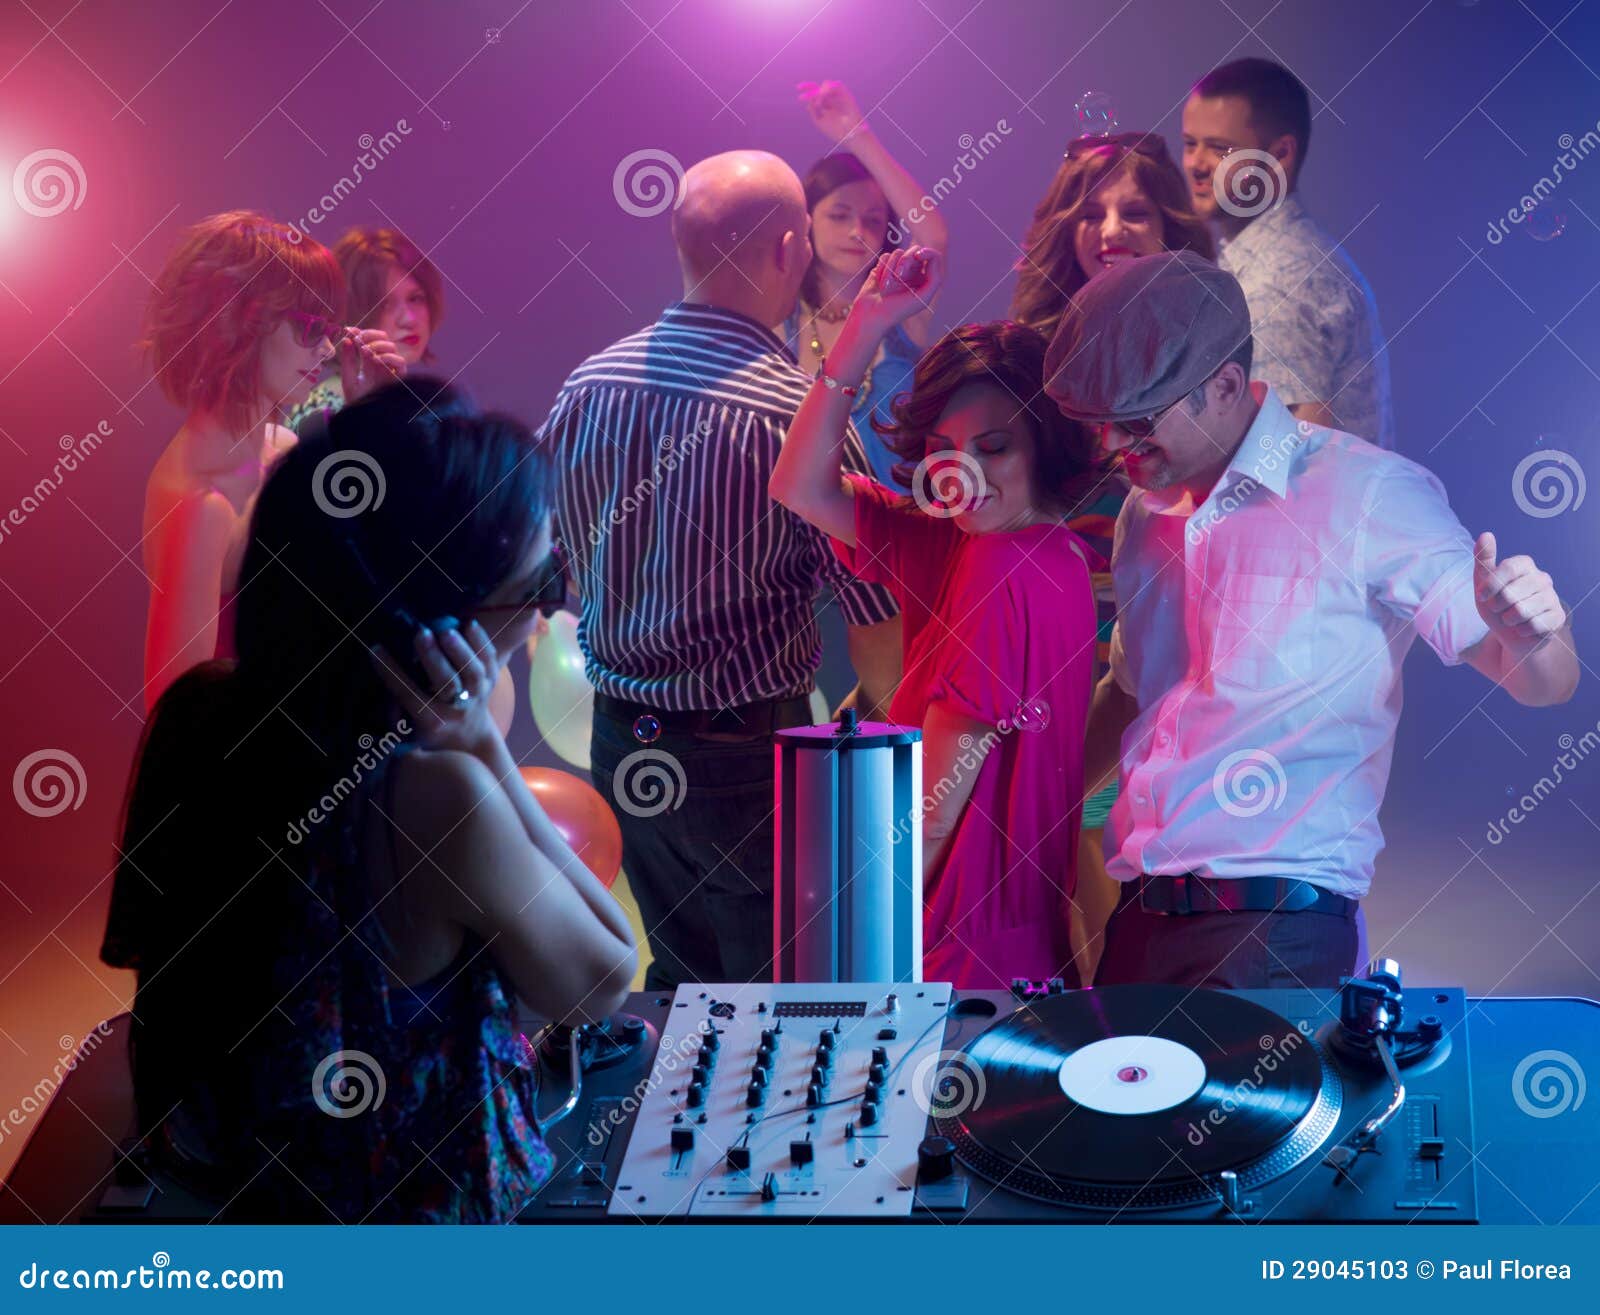 Young Couple Dancing at Party with Female Dj Stock Image - Image of ...